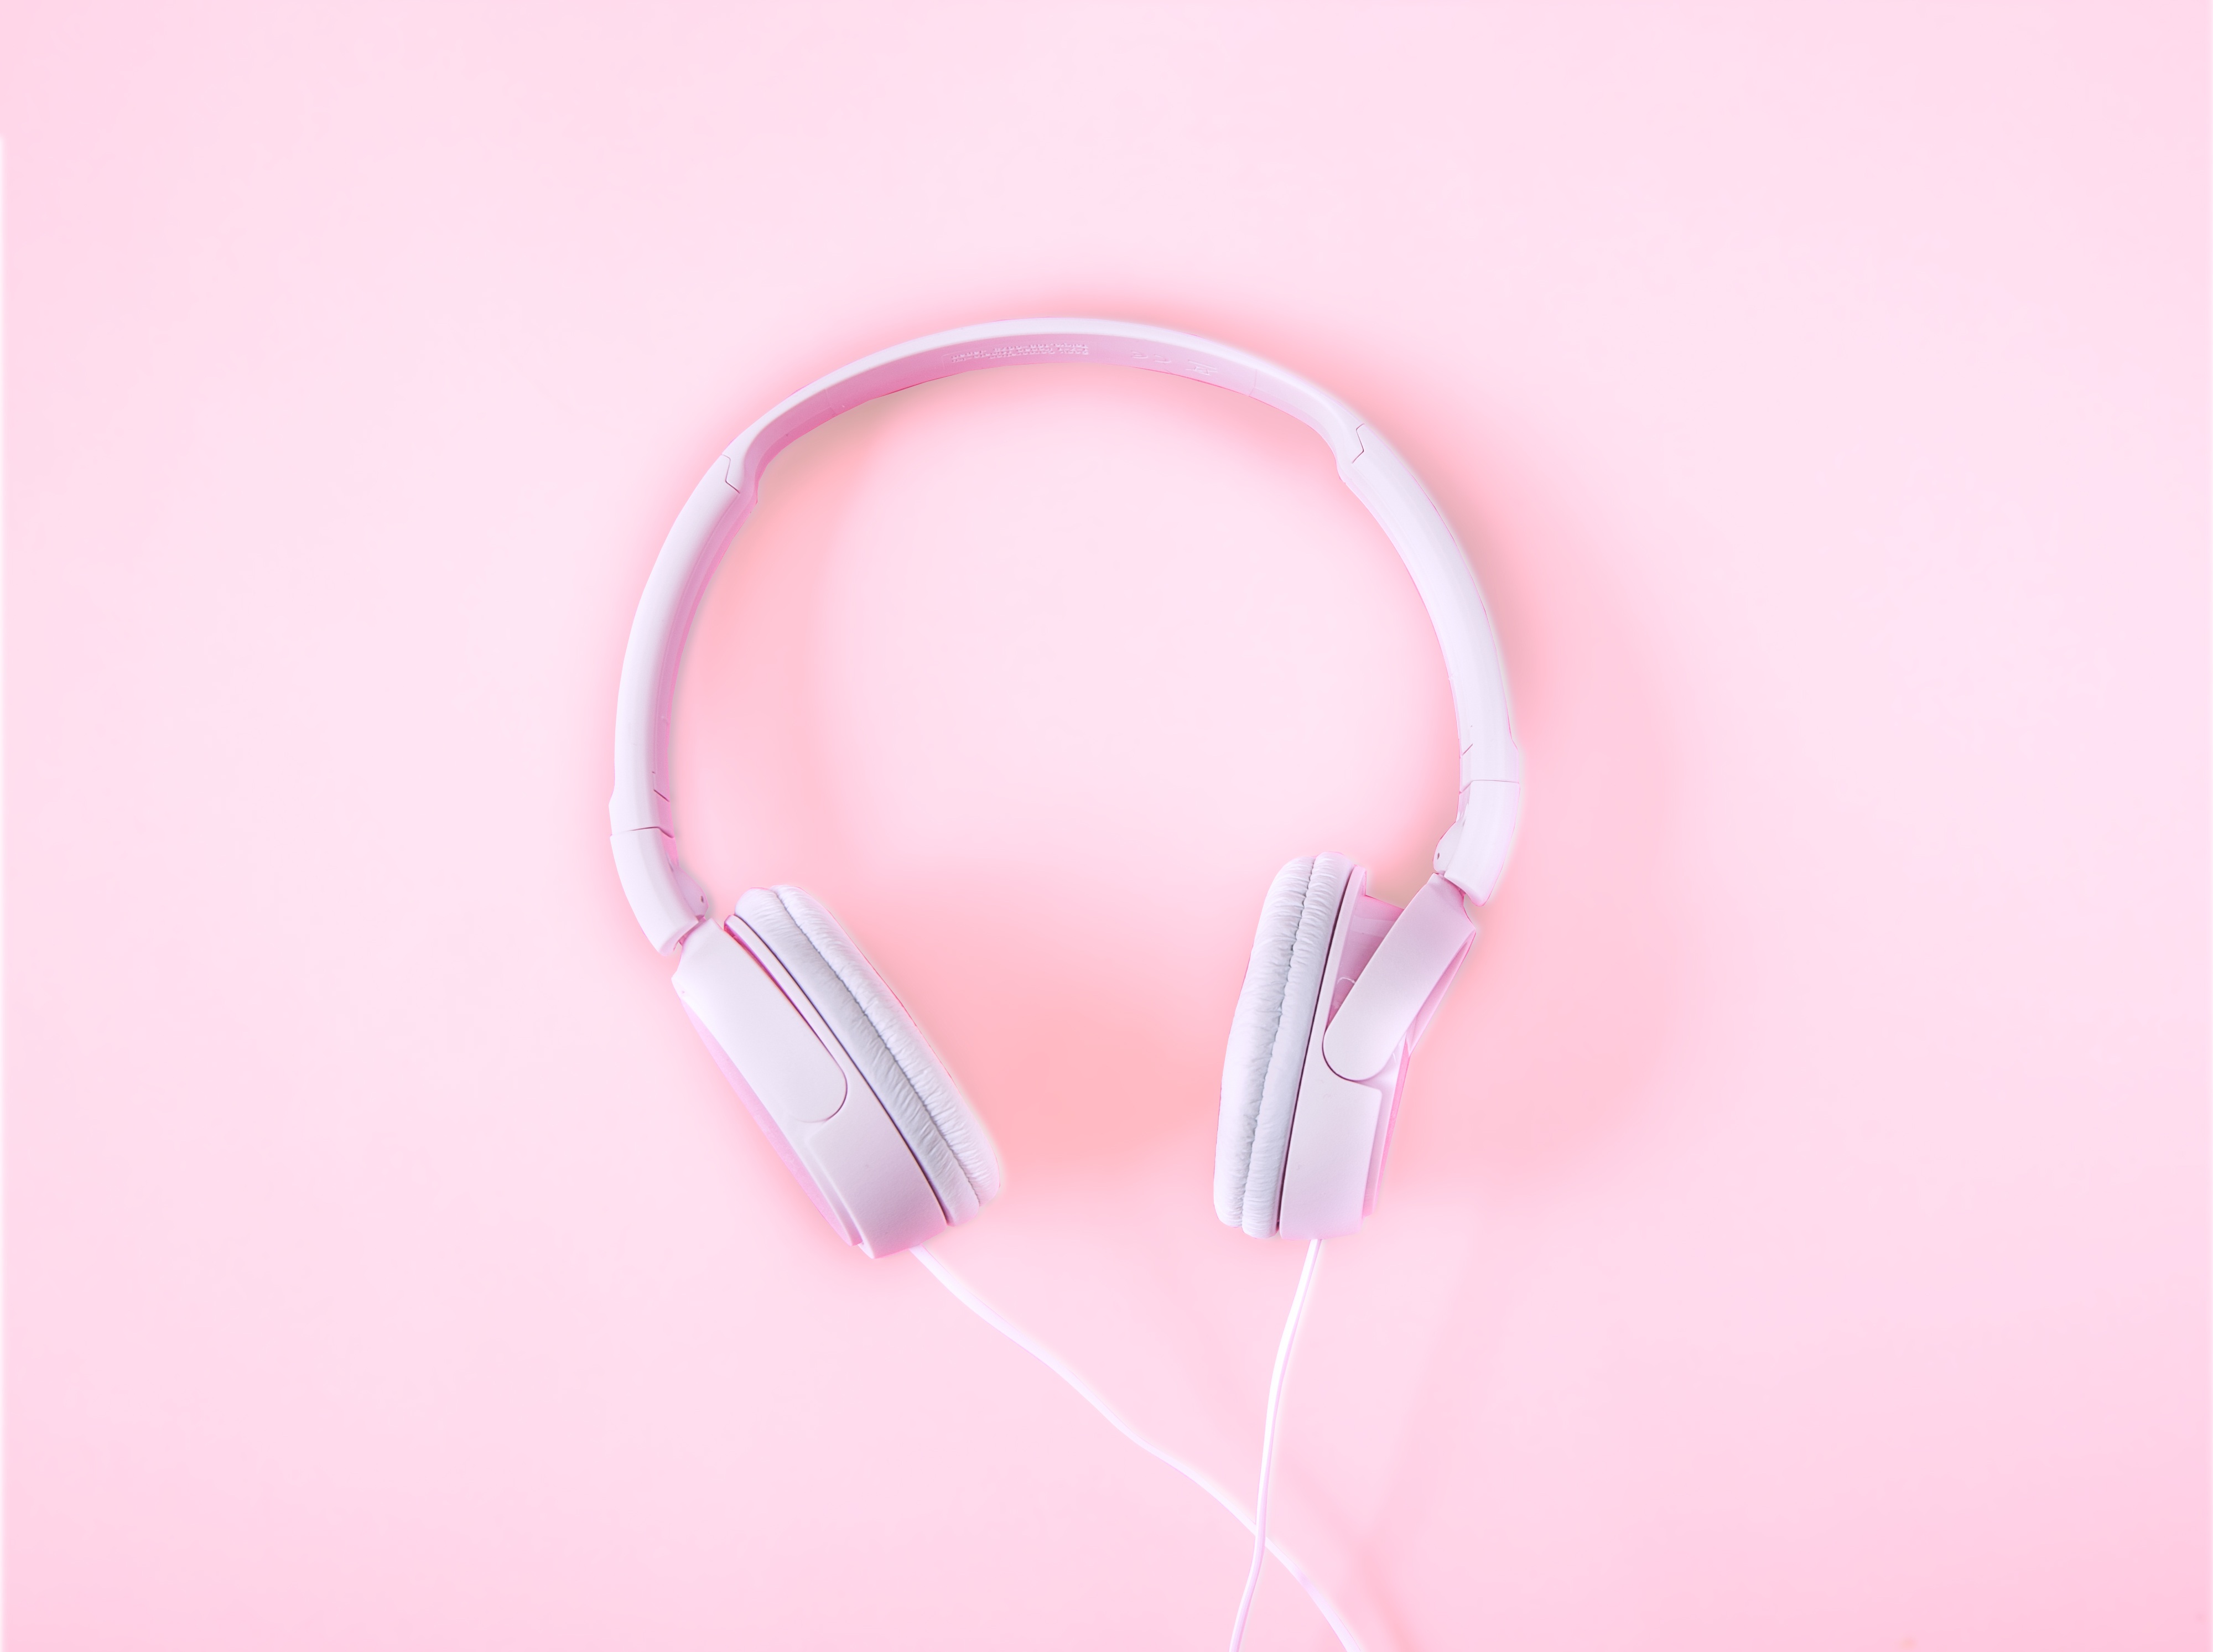 Headphones on a pink background